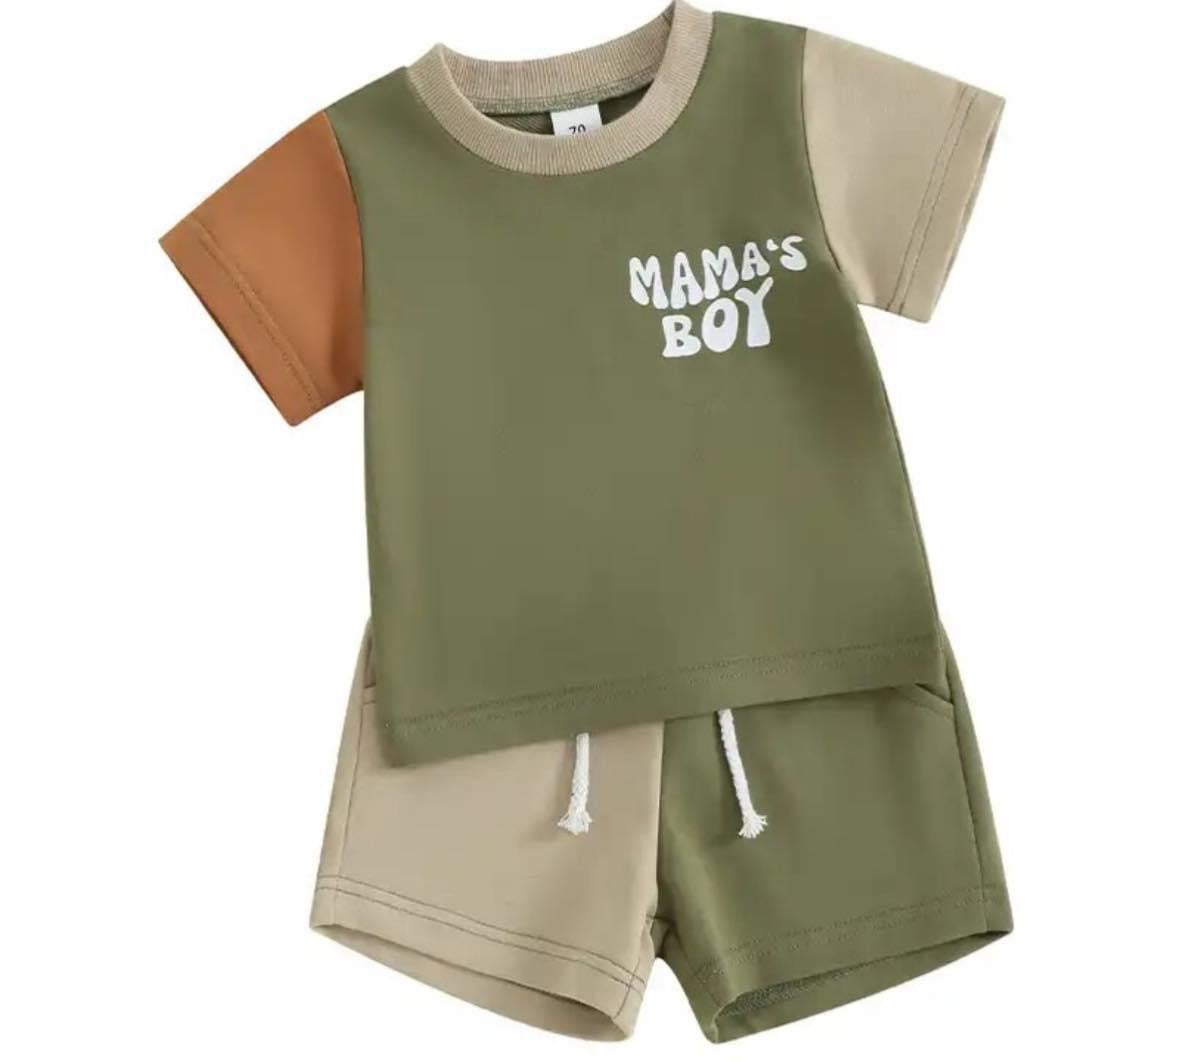 Mama’s boy and Daddy’s girl sets